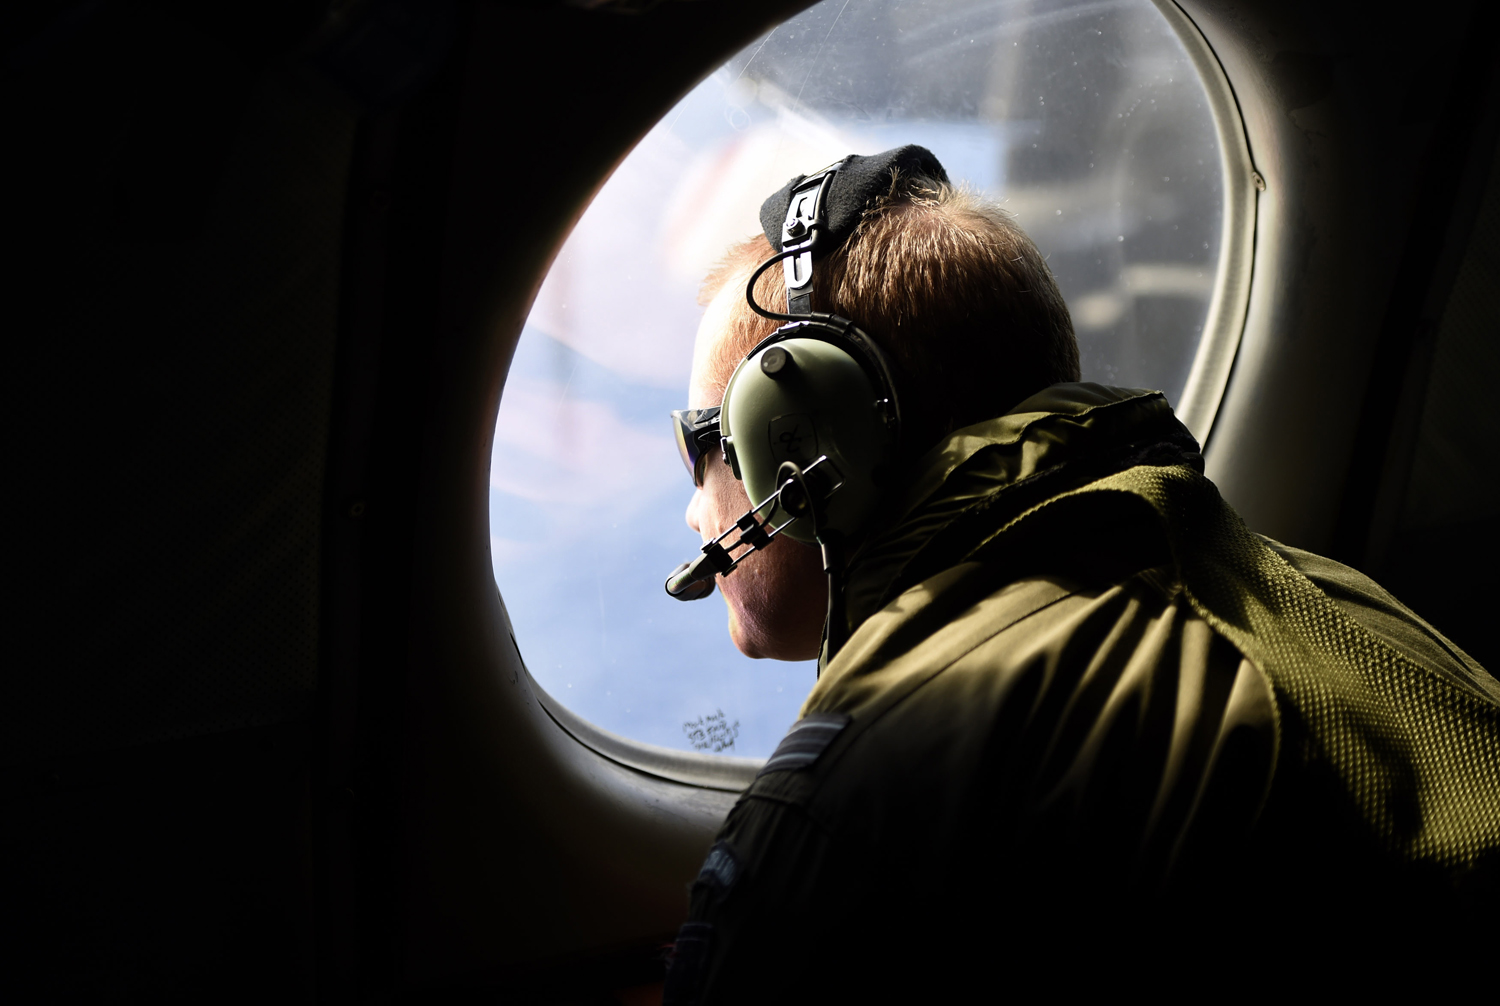 A crew member looks out an observation window aboard a Royal New Zealand Air Force (RNZAF) P3 Orion maritime search aircraft as it flies over the southern Indian Ocean looking for debris from missing Malaysian Airlines flight MH370